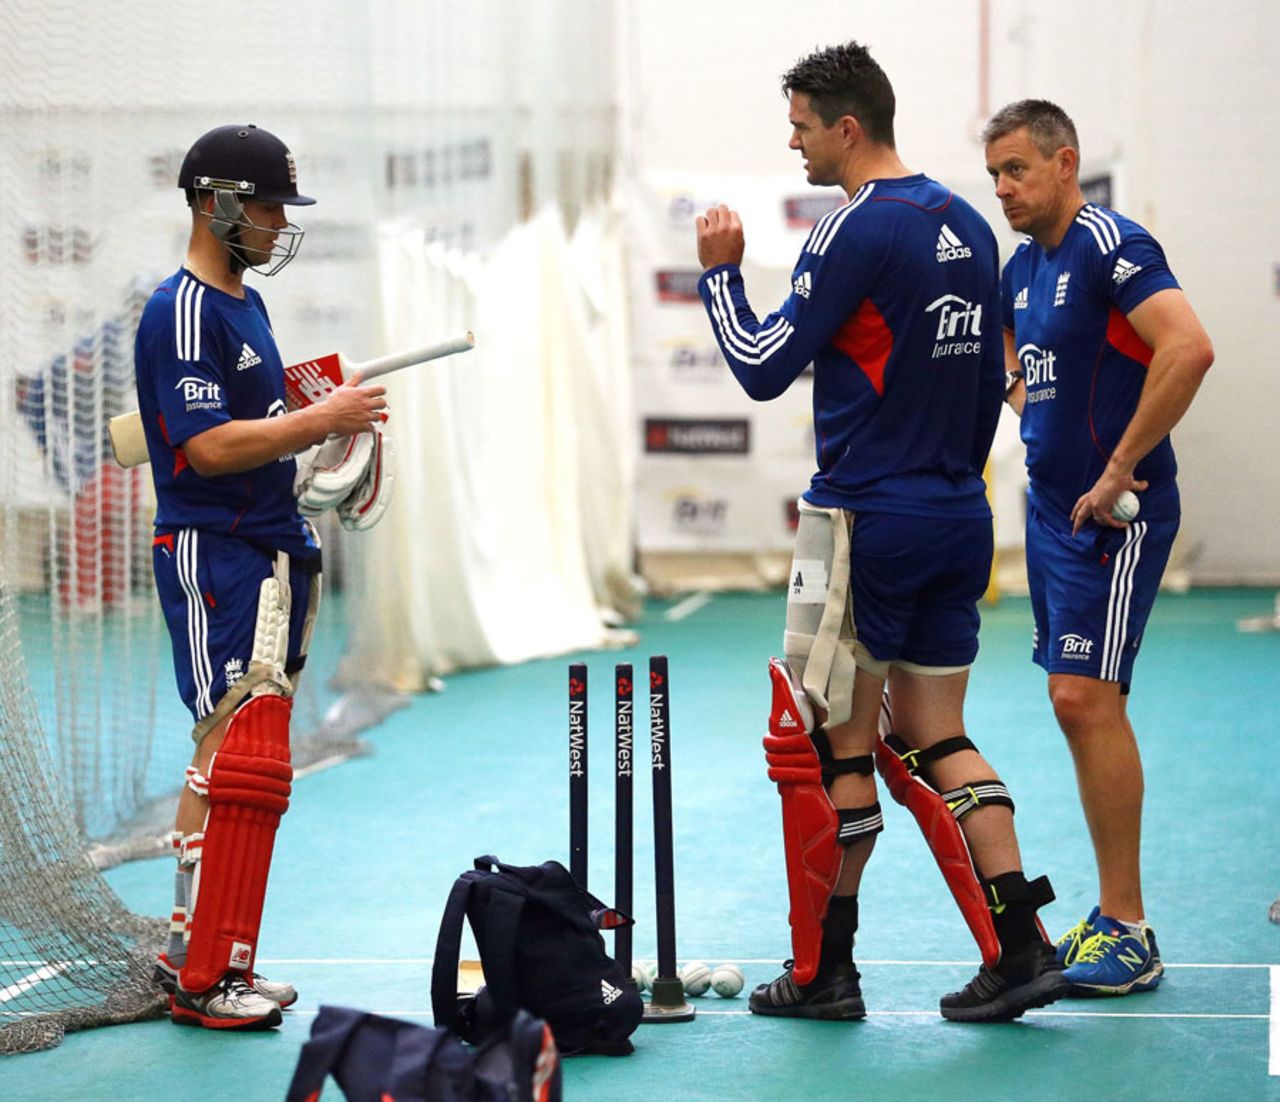 Kevin Pietersen and Eoin Morgan discuss their batting with Ashley Giles, Cardiff, September, 13, 2013